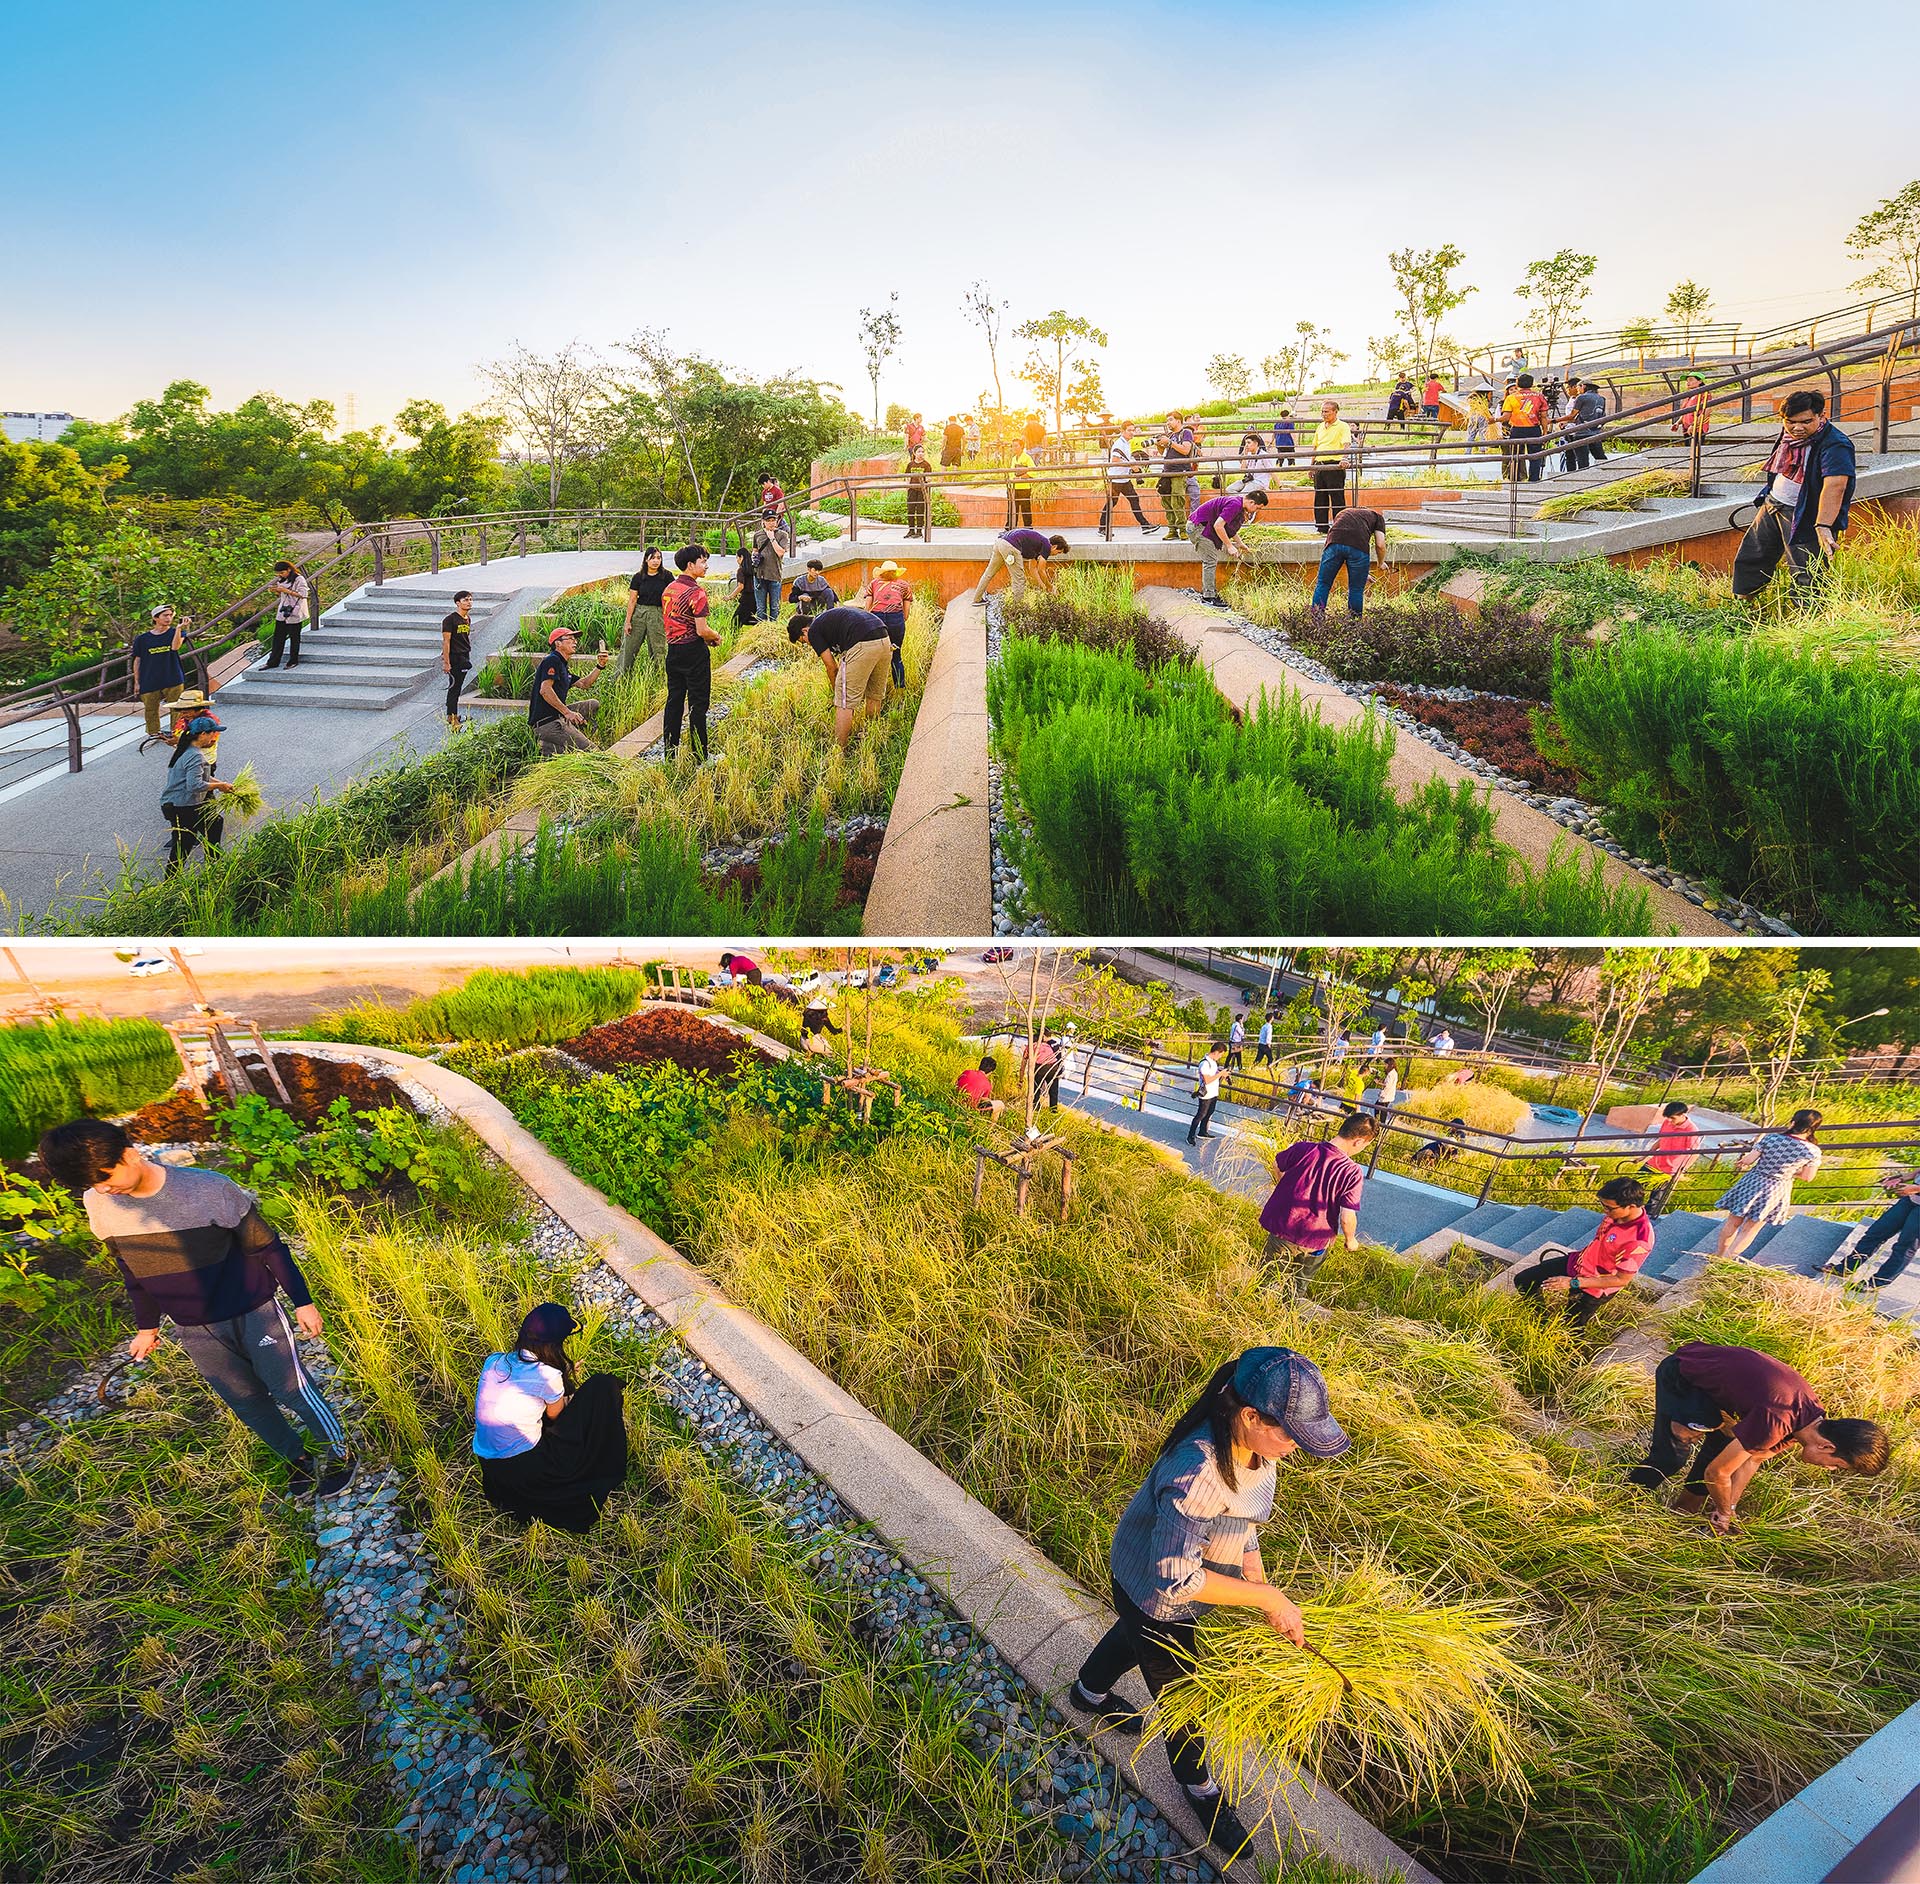 A rooftop farm with a terraced landscape design inspired by rice fields.